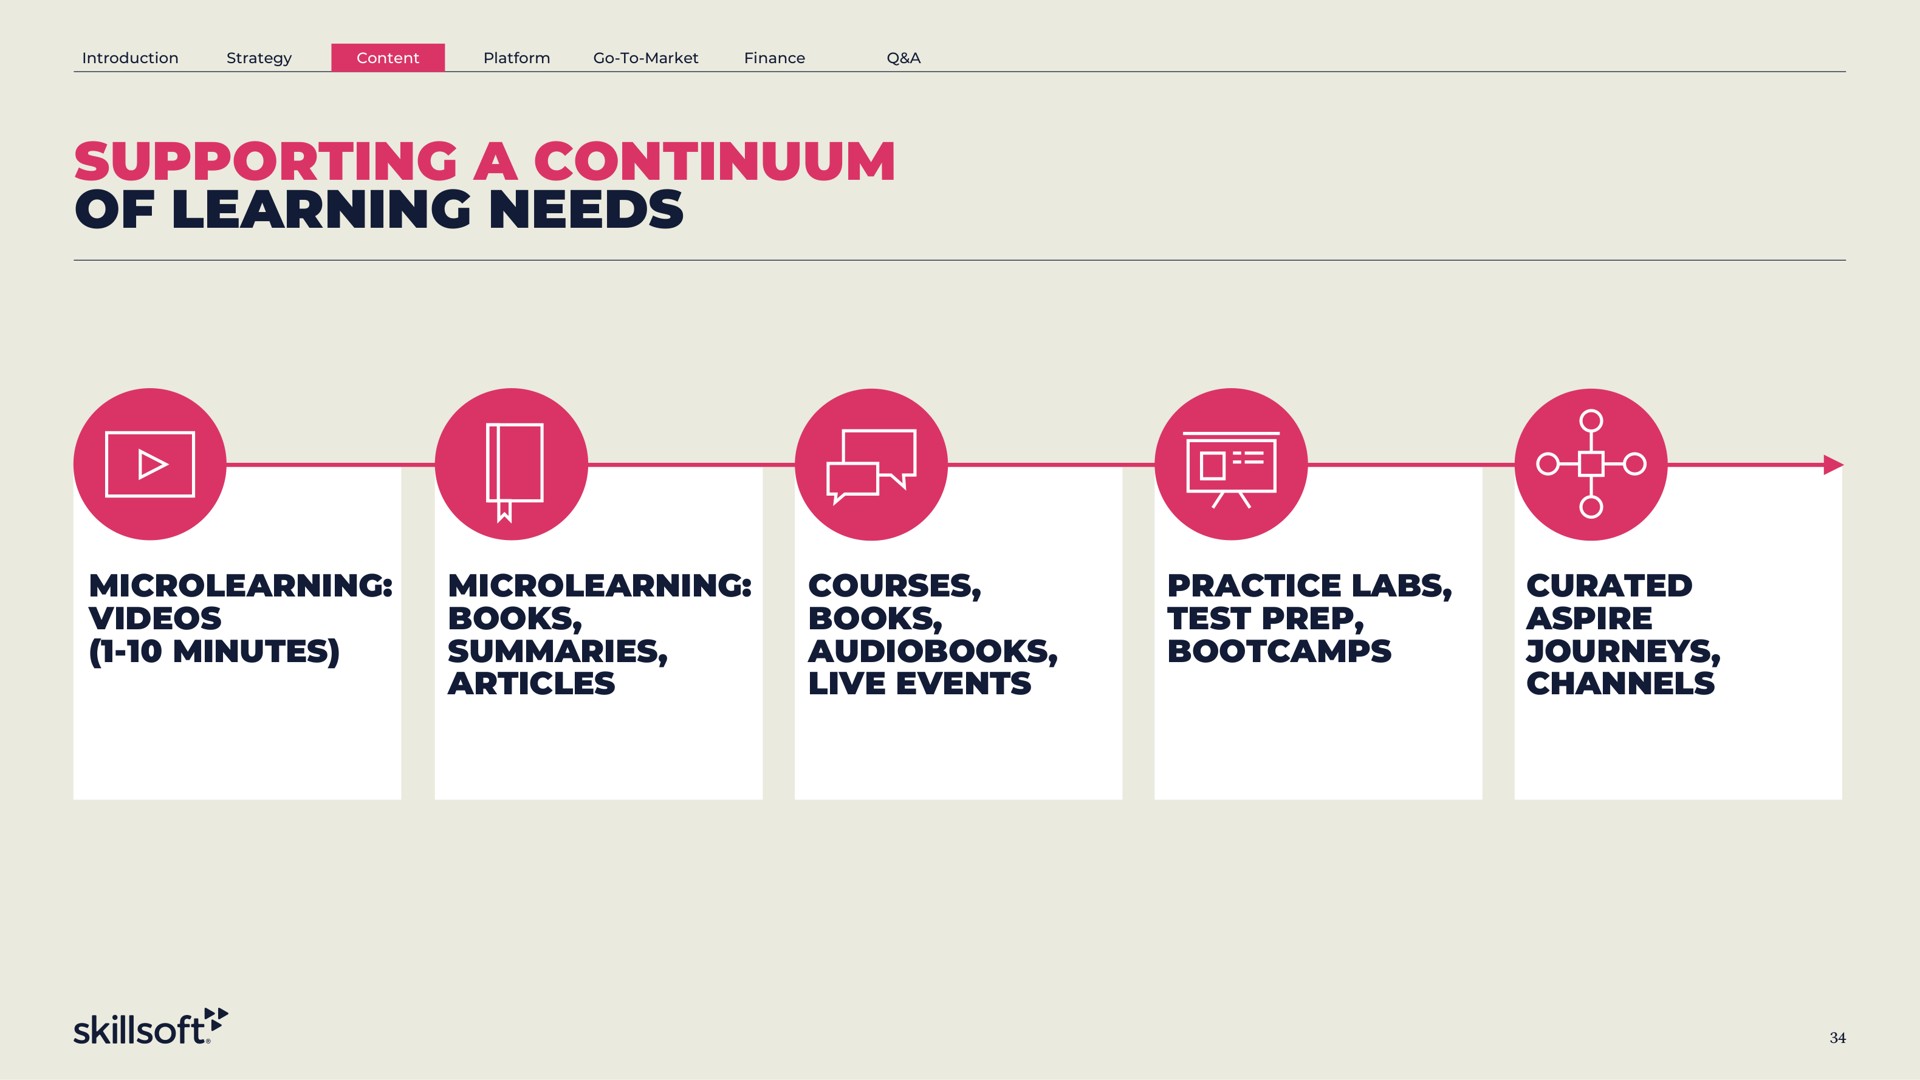 supporting a continuum of learning needs videos minutes books summaries articles courses books live events practice labs test prep aspire journeys channels | Skillsoft